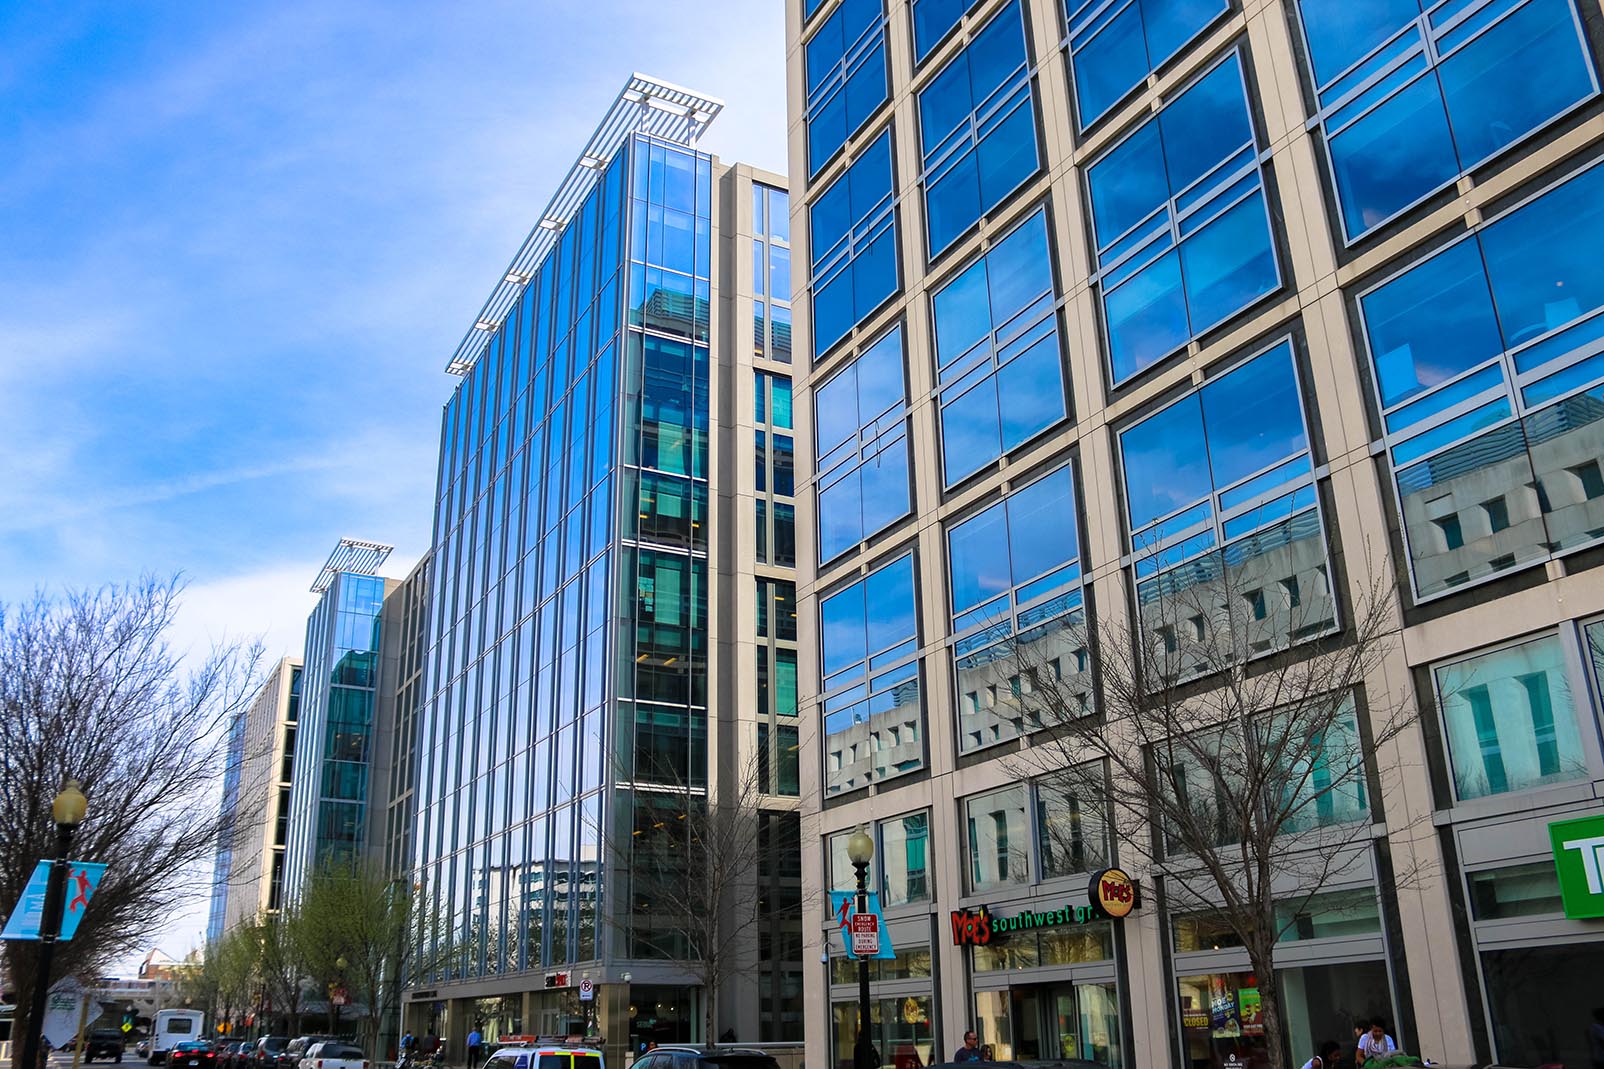 Glass buildings in NoMa, Washington, D.C.